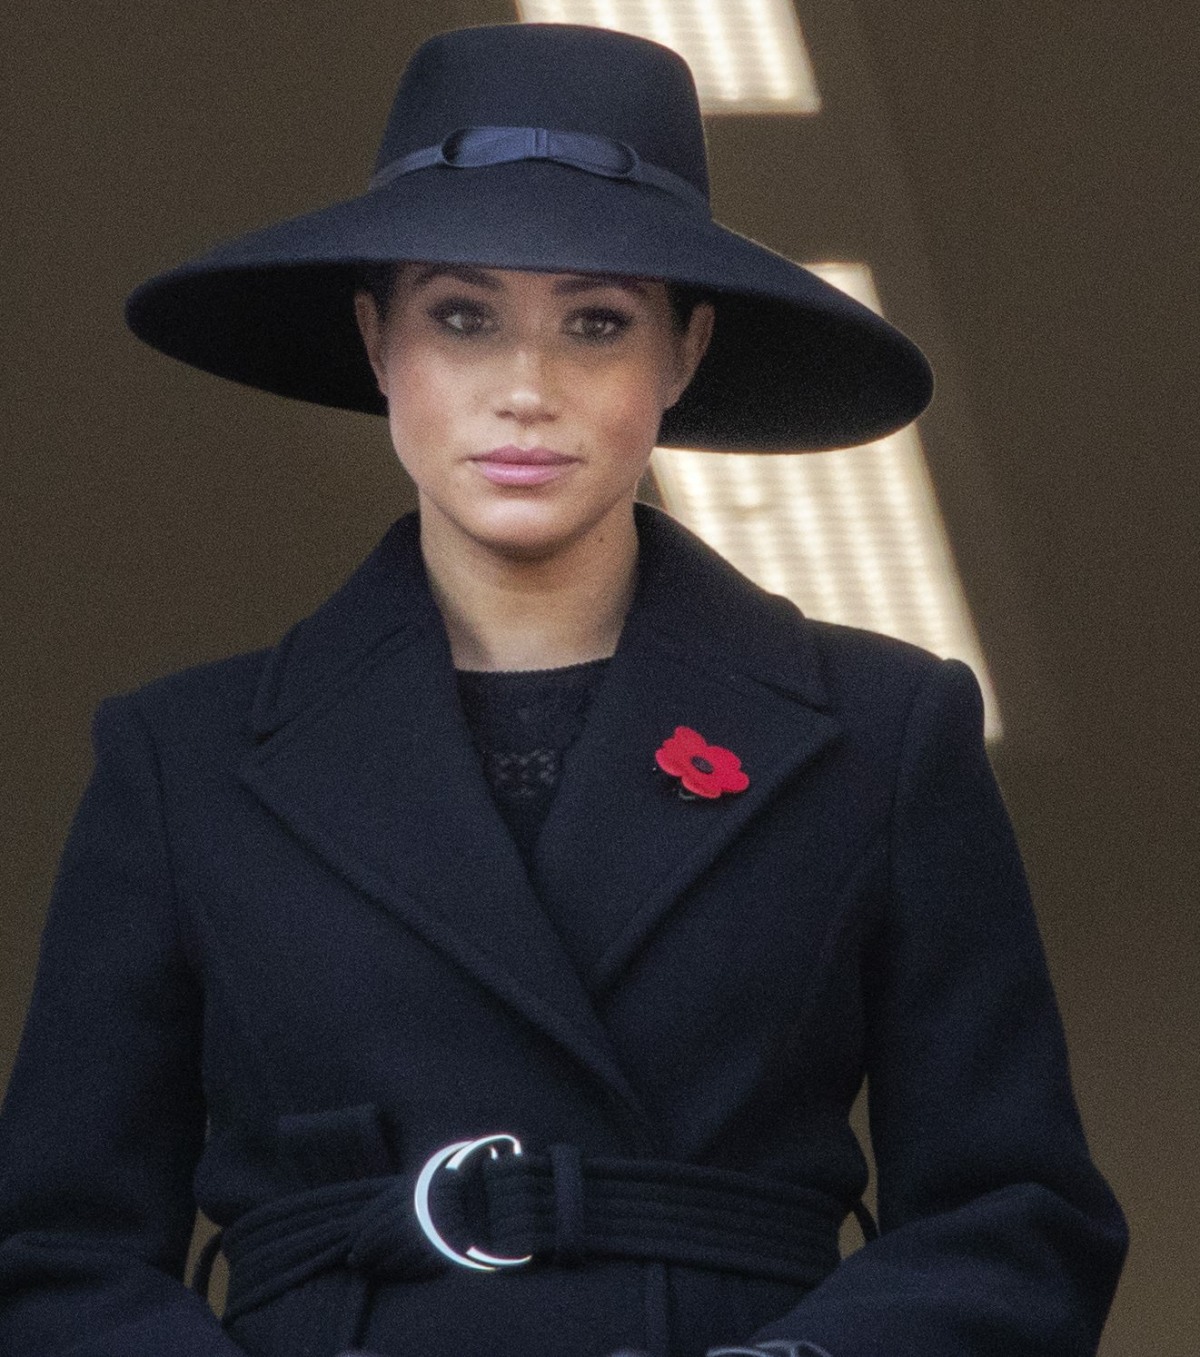 Meghan, Duchess of Sussex at the balcony of  the Foreign and Commonwealth Office at Whitehall in Londen, on November 10, 2019, to attend the National Service of Remembrance at the CenotaphPhoto: Albert Nieboer / Netherlands OUT / Point de Vue OUT |